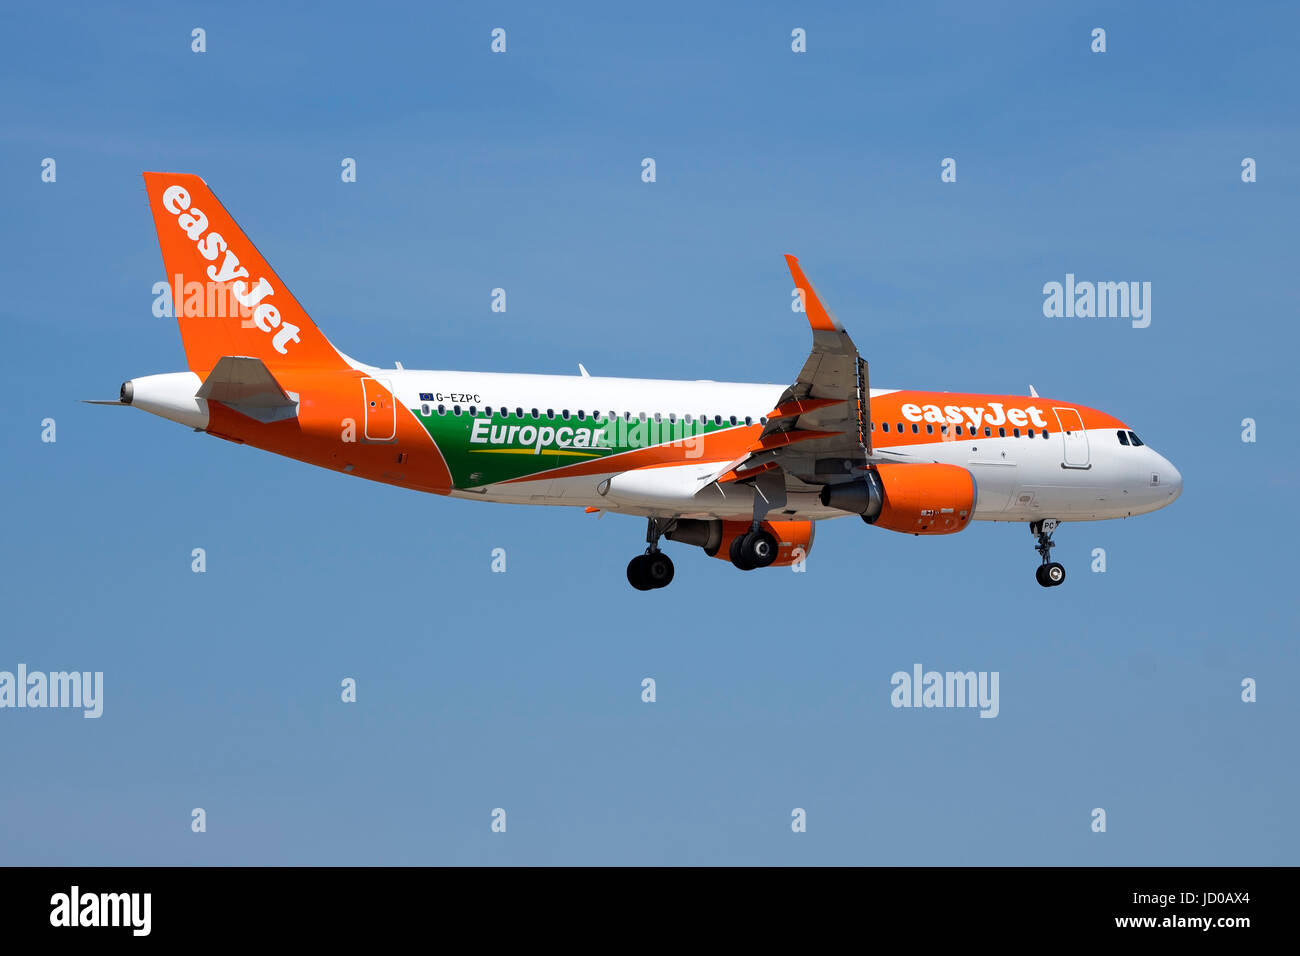 EasyJet Airline Airbus A320-214 [G-EZPC] with a special color scheme promoting Europcar. Stock Photo